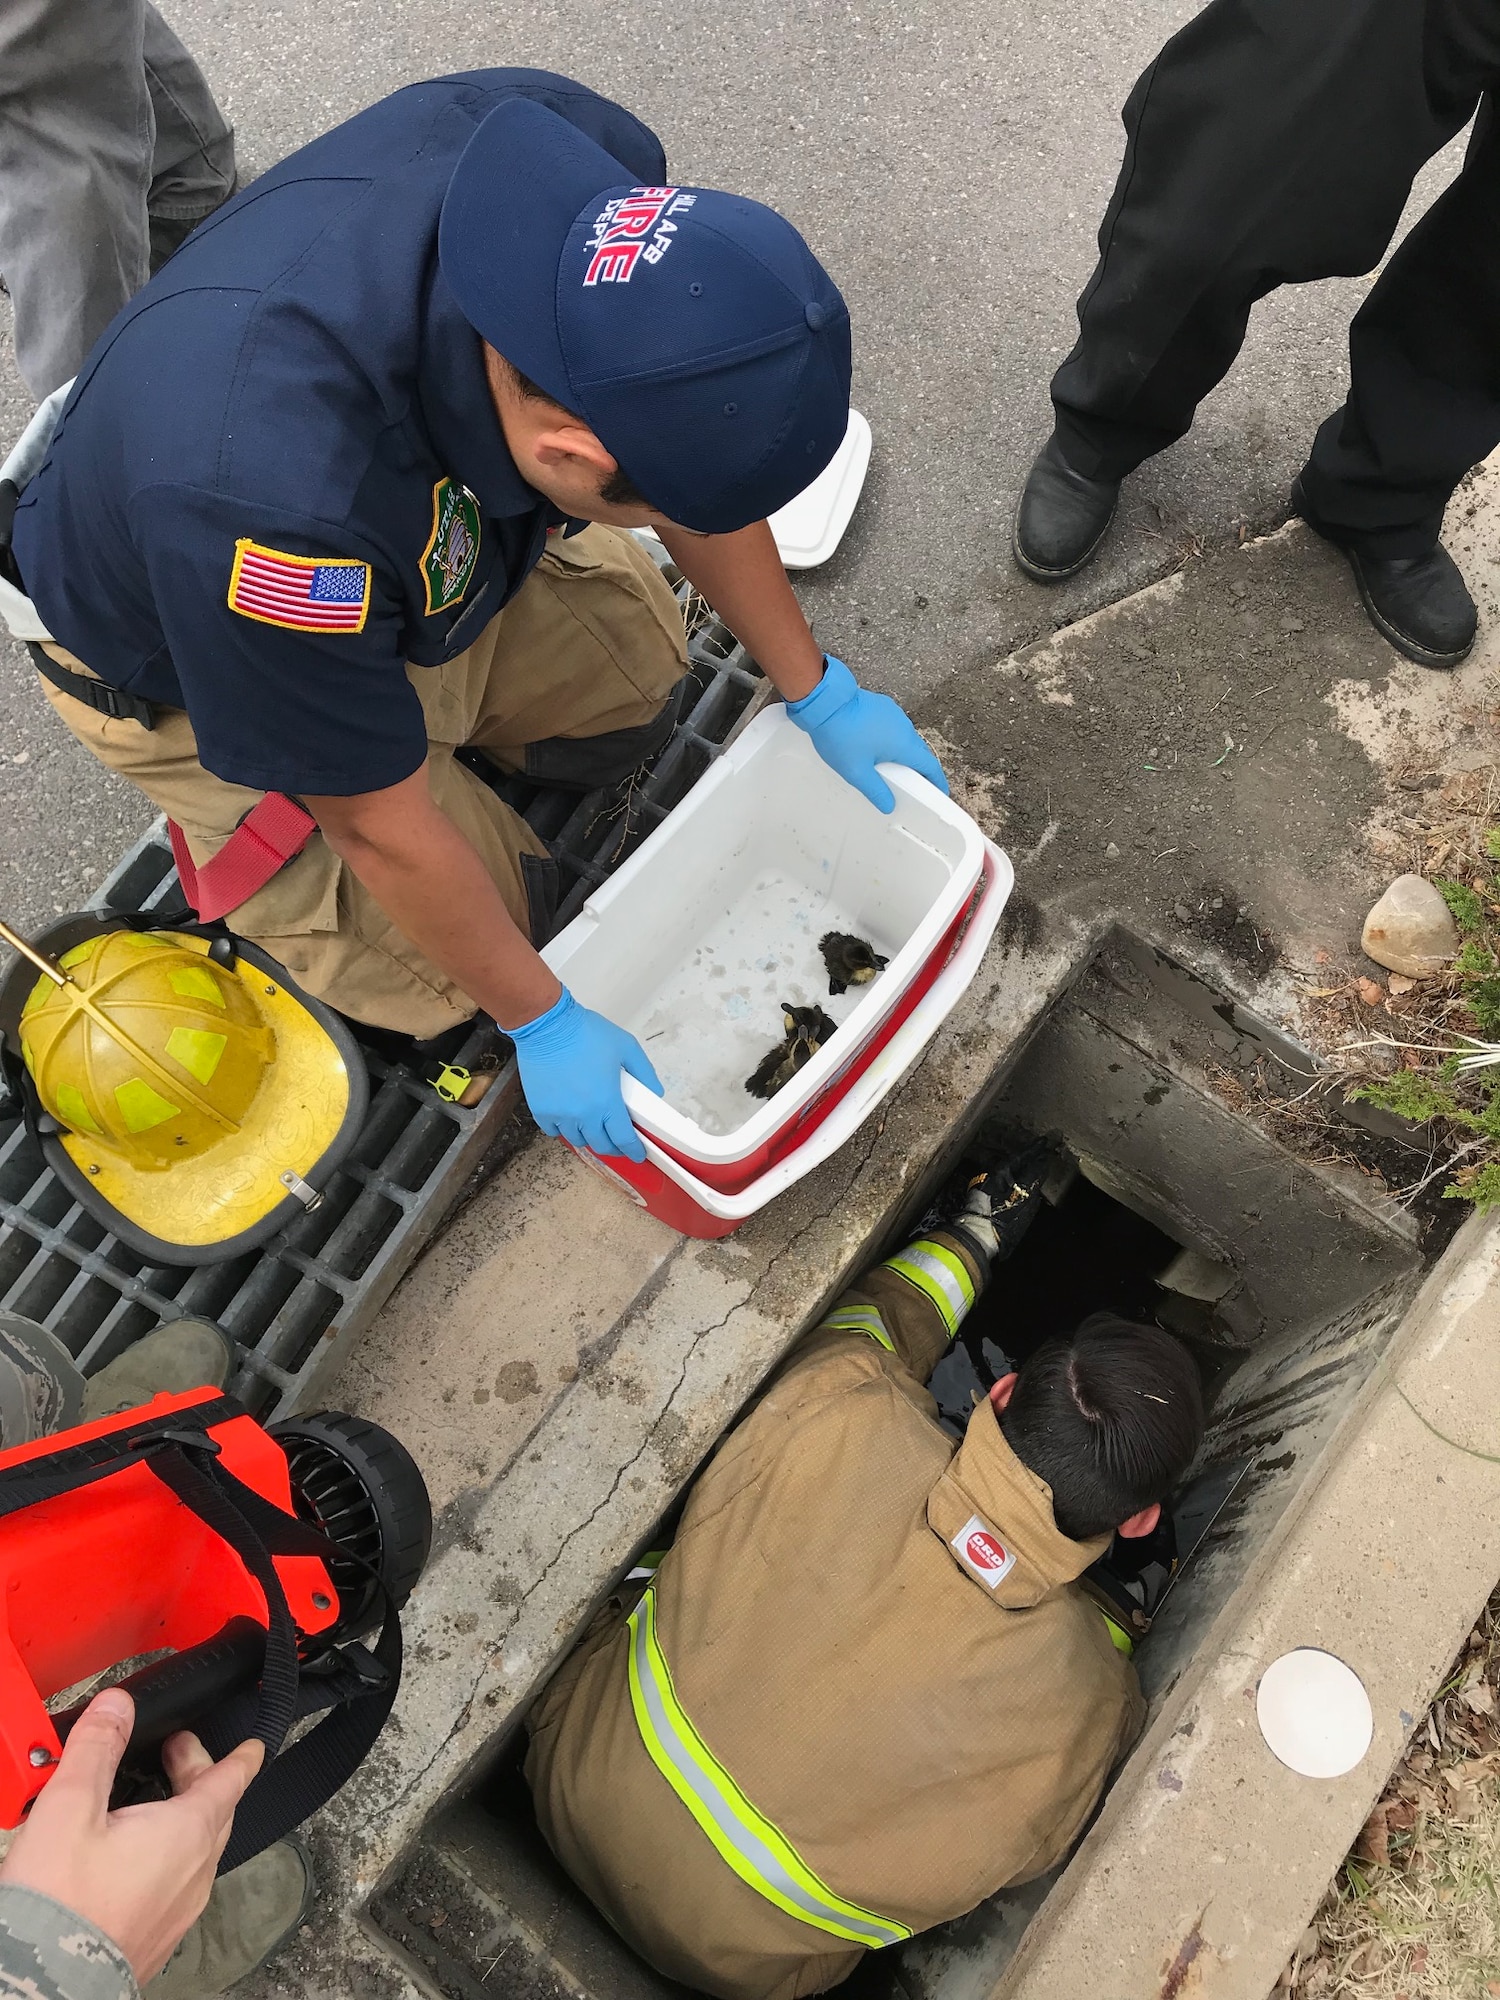 Firefighters were called to a parking lot near building 430 on 6th Street May 2, 2018, at Hill Air Force Base, Utah, to rescue baby ducks stuck in a storm drain. (Courtesy photo)